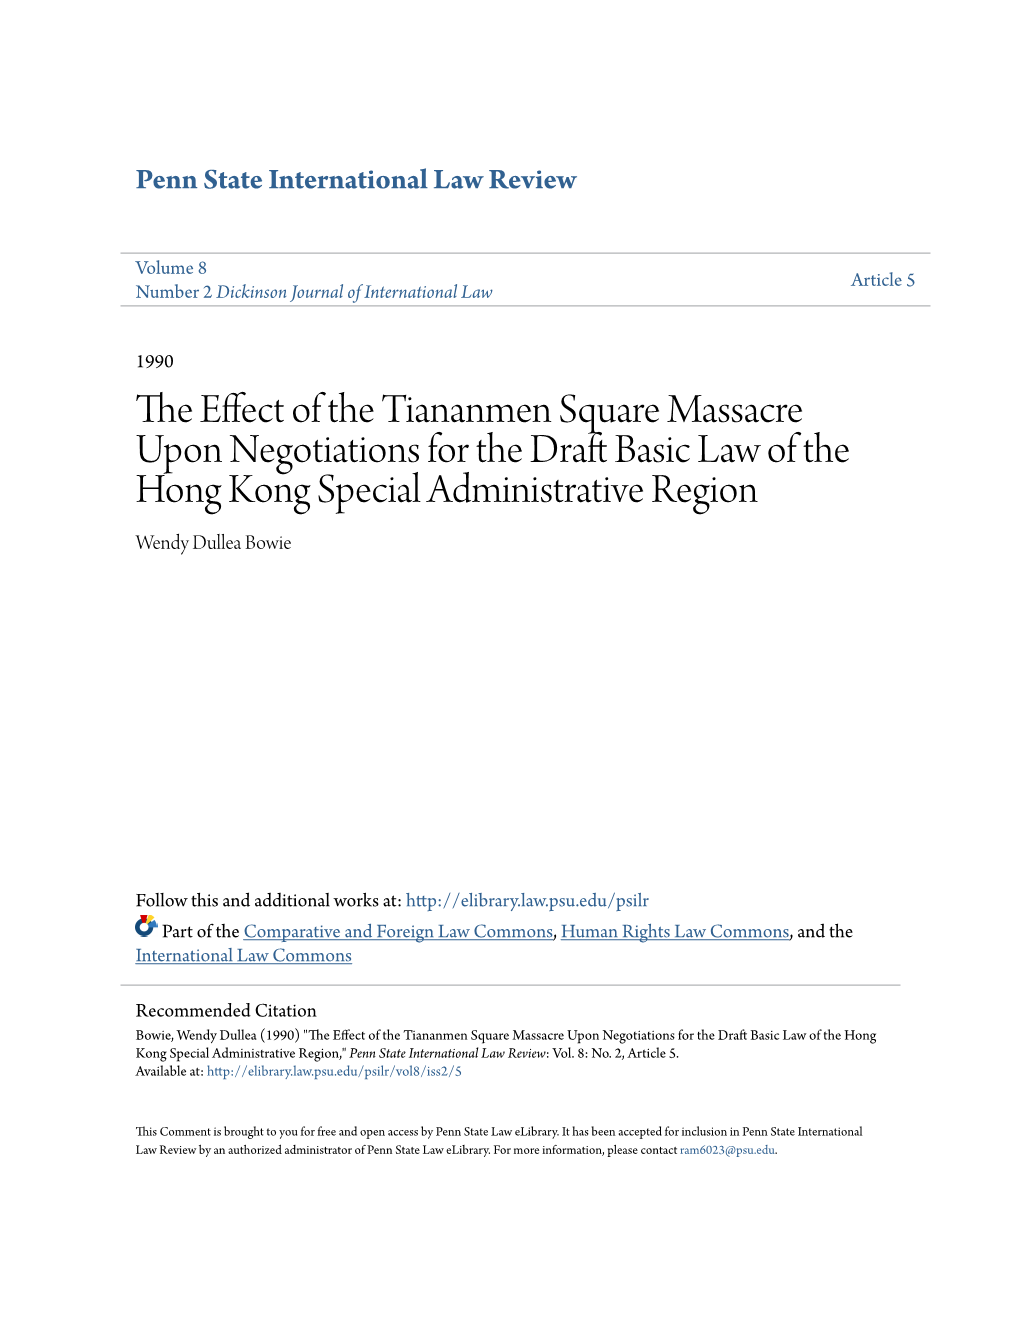 The Effect of the Tiananmen Square Massacre Upon Negotiations for The